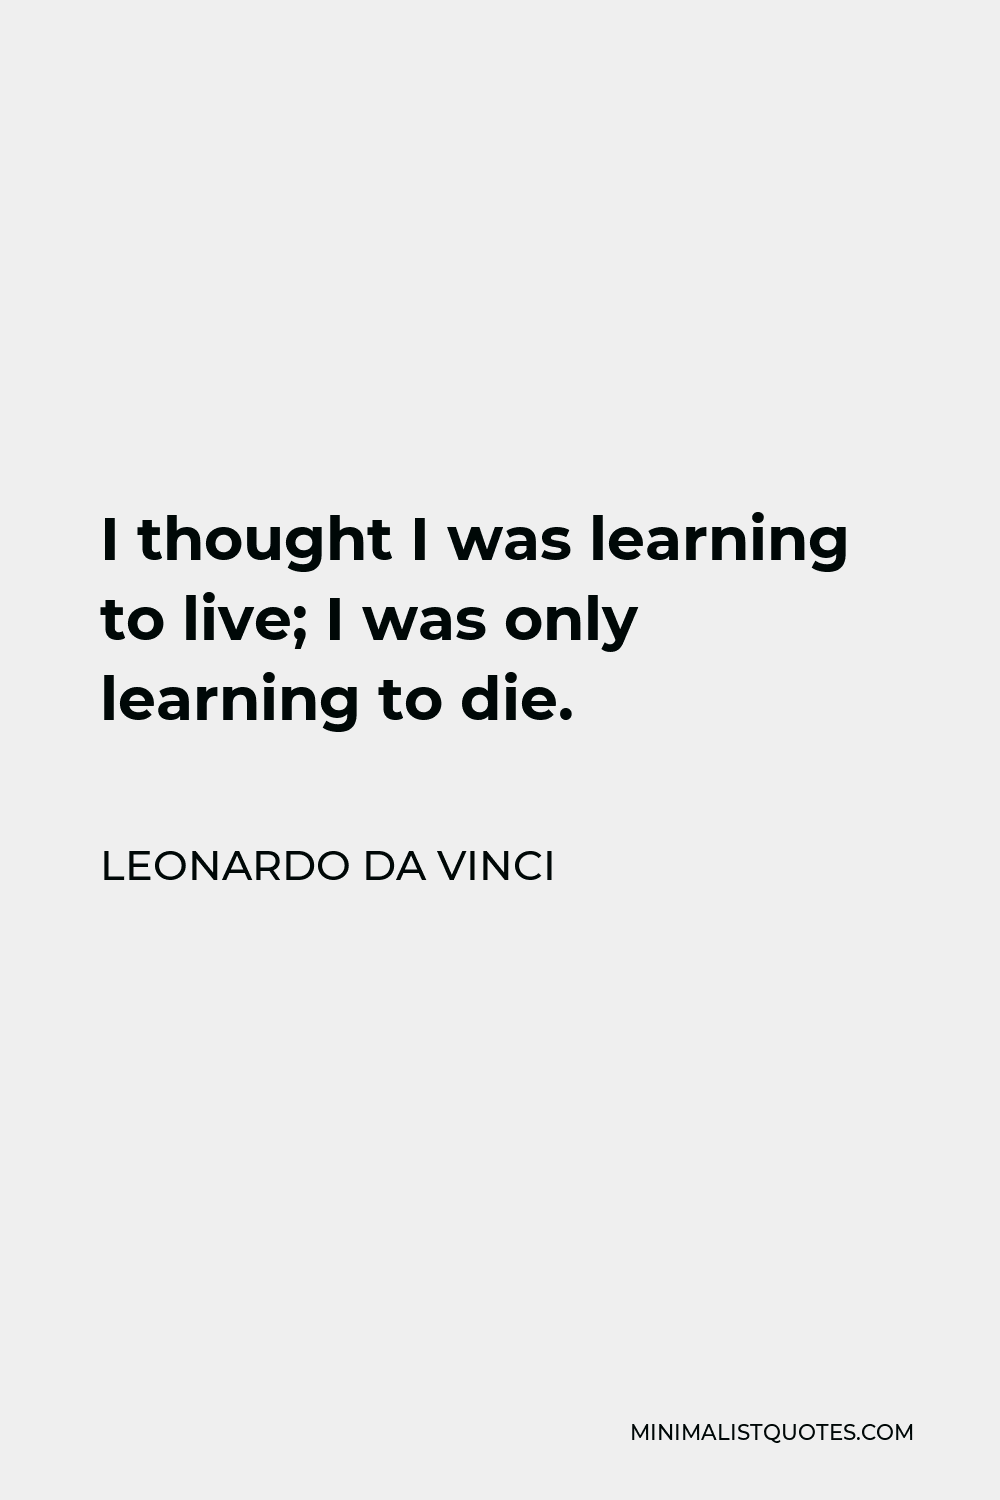 Leonardo da Vinci Quote - I thought I was learning to live; I was only learning to die.